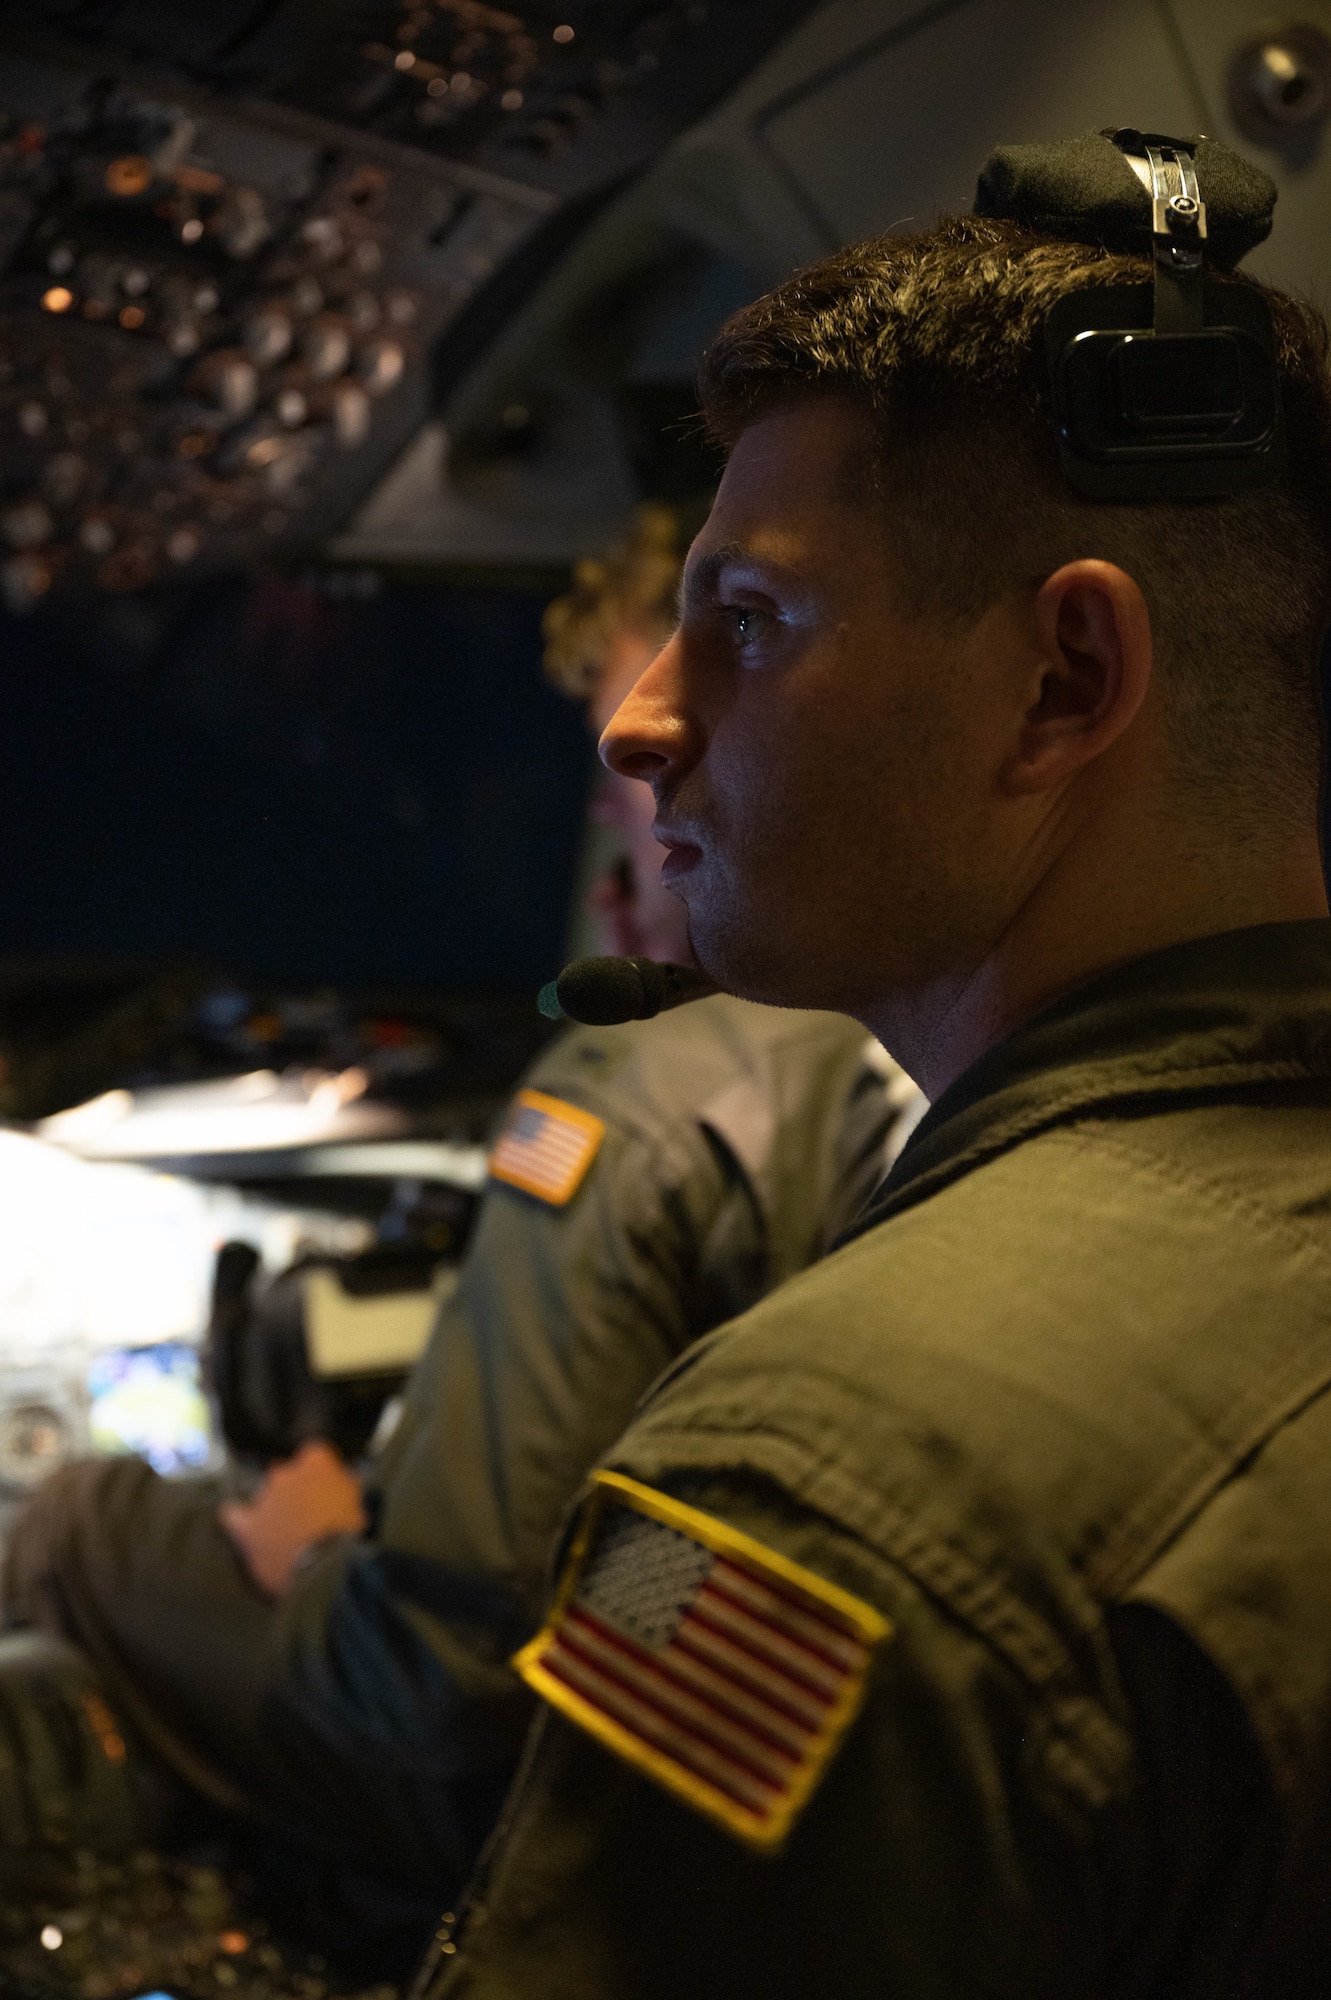 An Airman sits in the cockpit of an aircraft with a headset on.